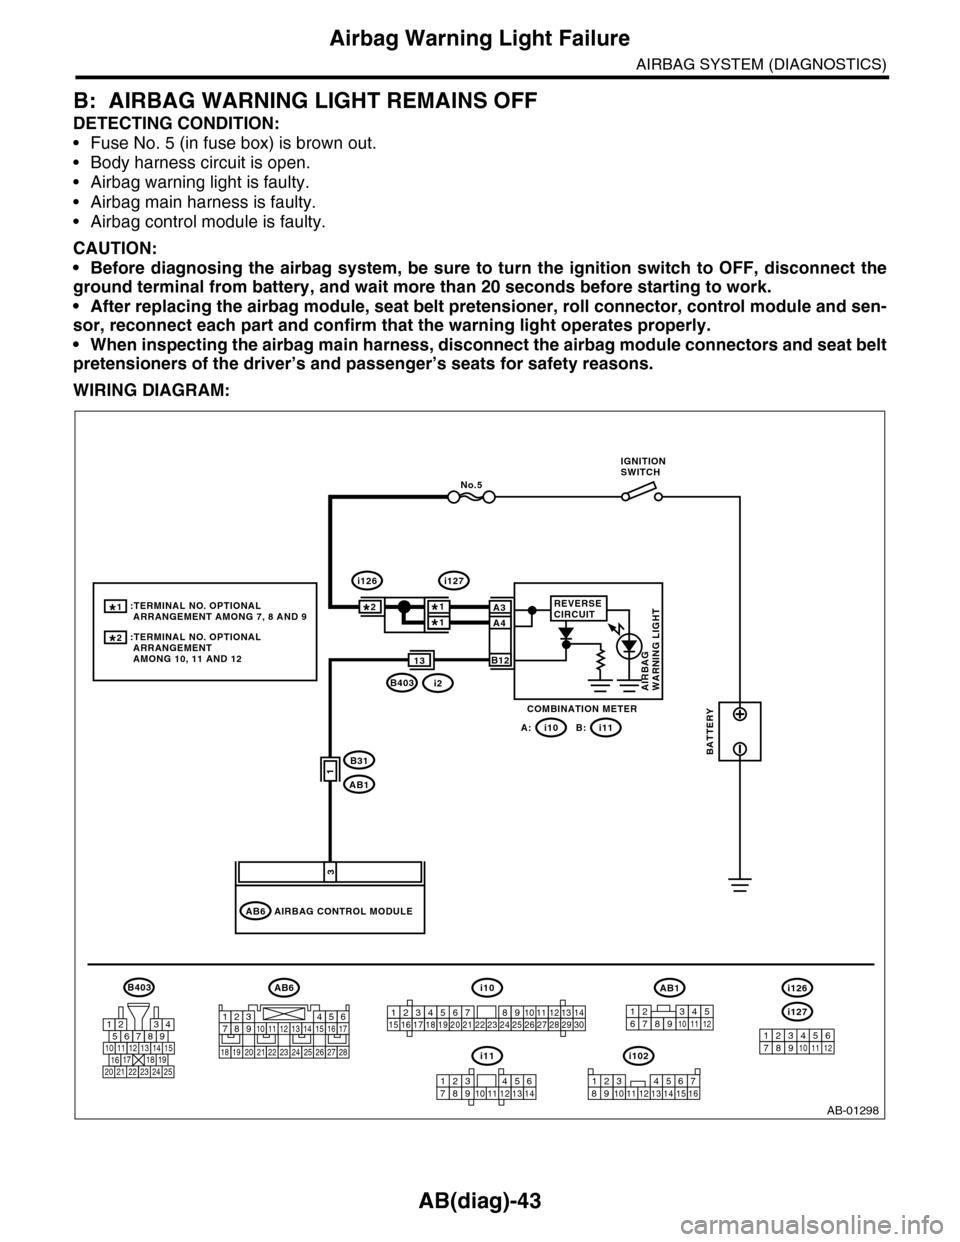 SUBARU TRIBECA 2009 1.G Service Workshop Manual AB(diag)-43
Airbag Warning Light Failure
AIRBAG SYSTEM (DIAGNOSTICS)
B: AIRBAG WARNING LIGHT REMAINS OFF
DETECTING CONDITION:
•Fuse No. 5 (in fuse box) is brown out.
•Body harness circuit is open.